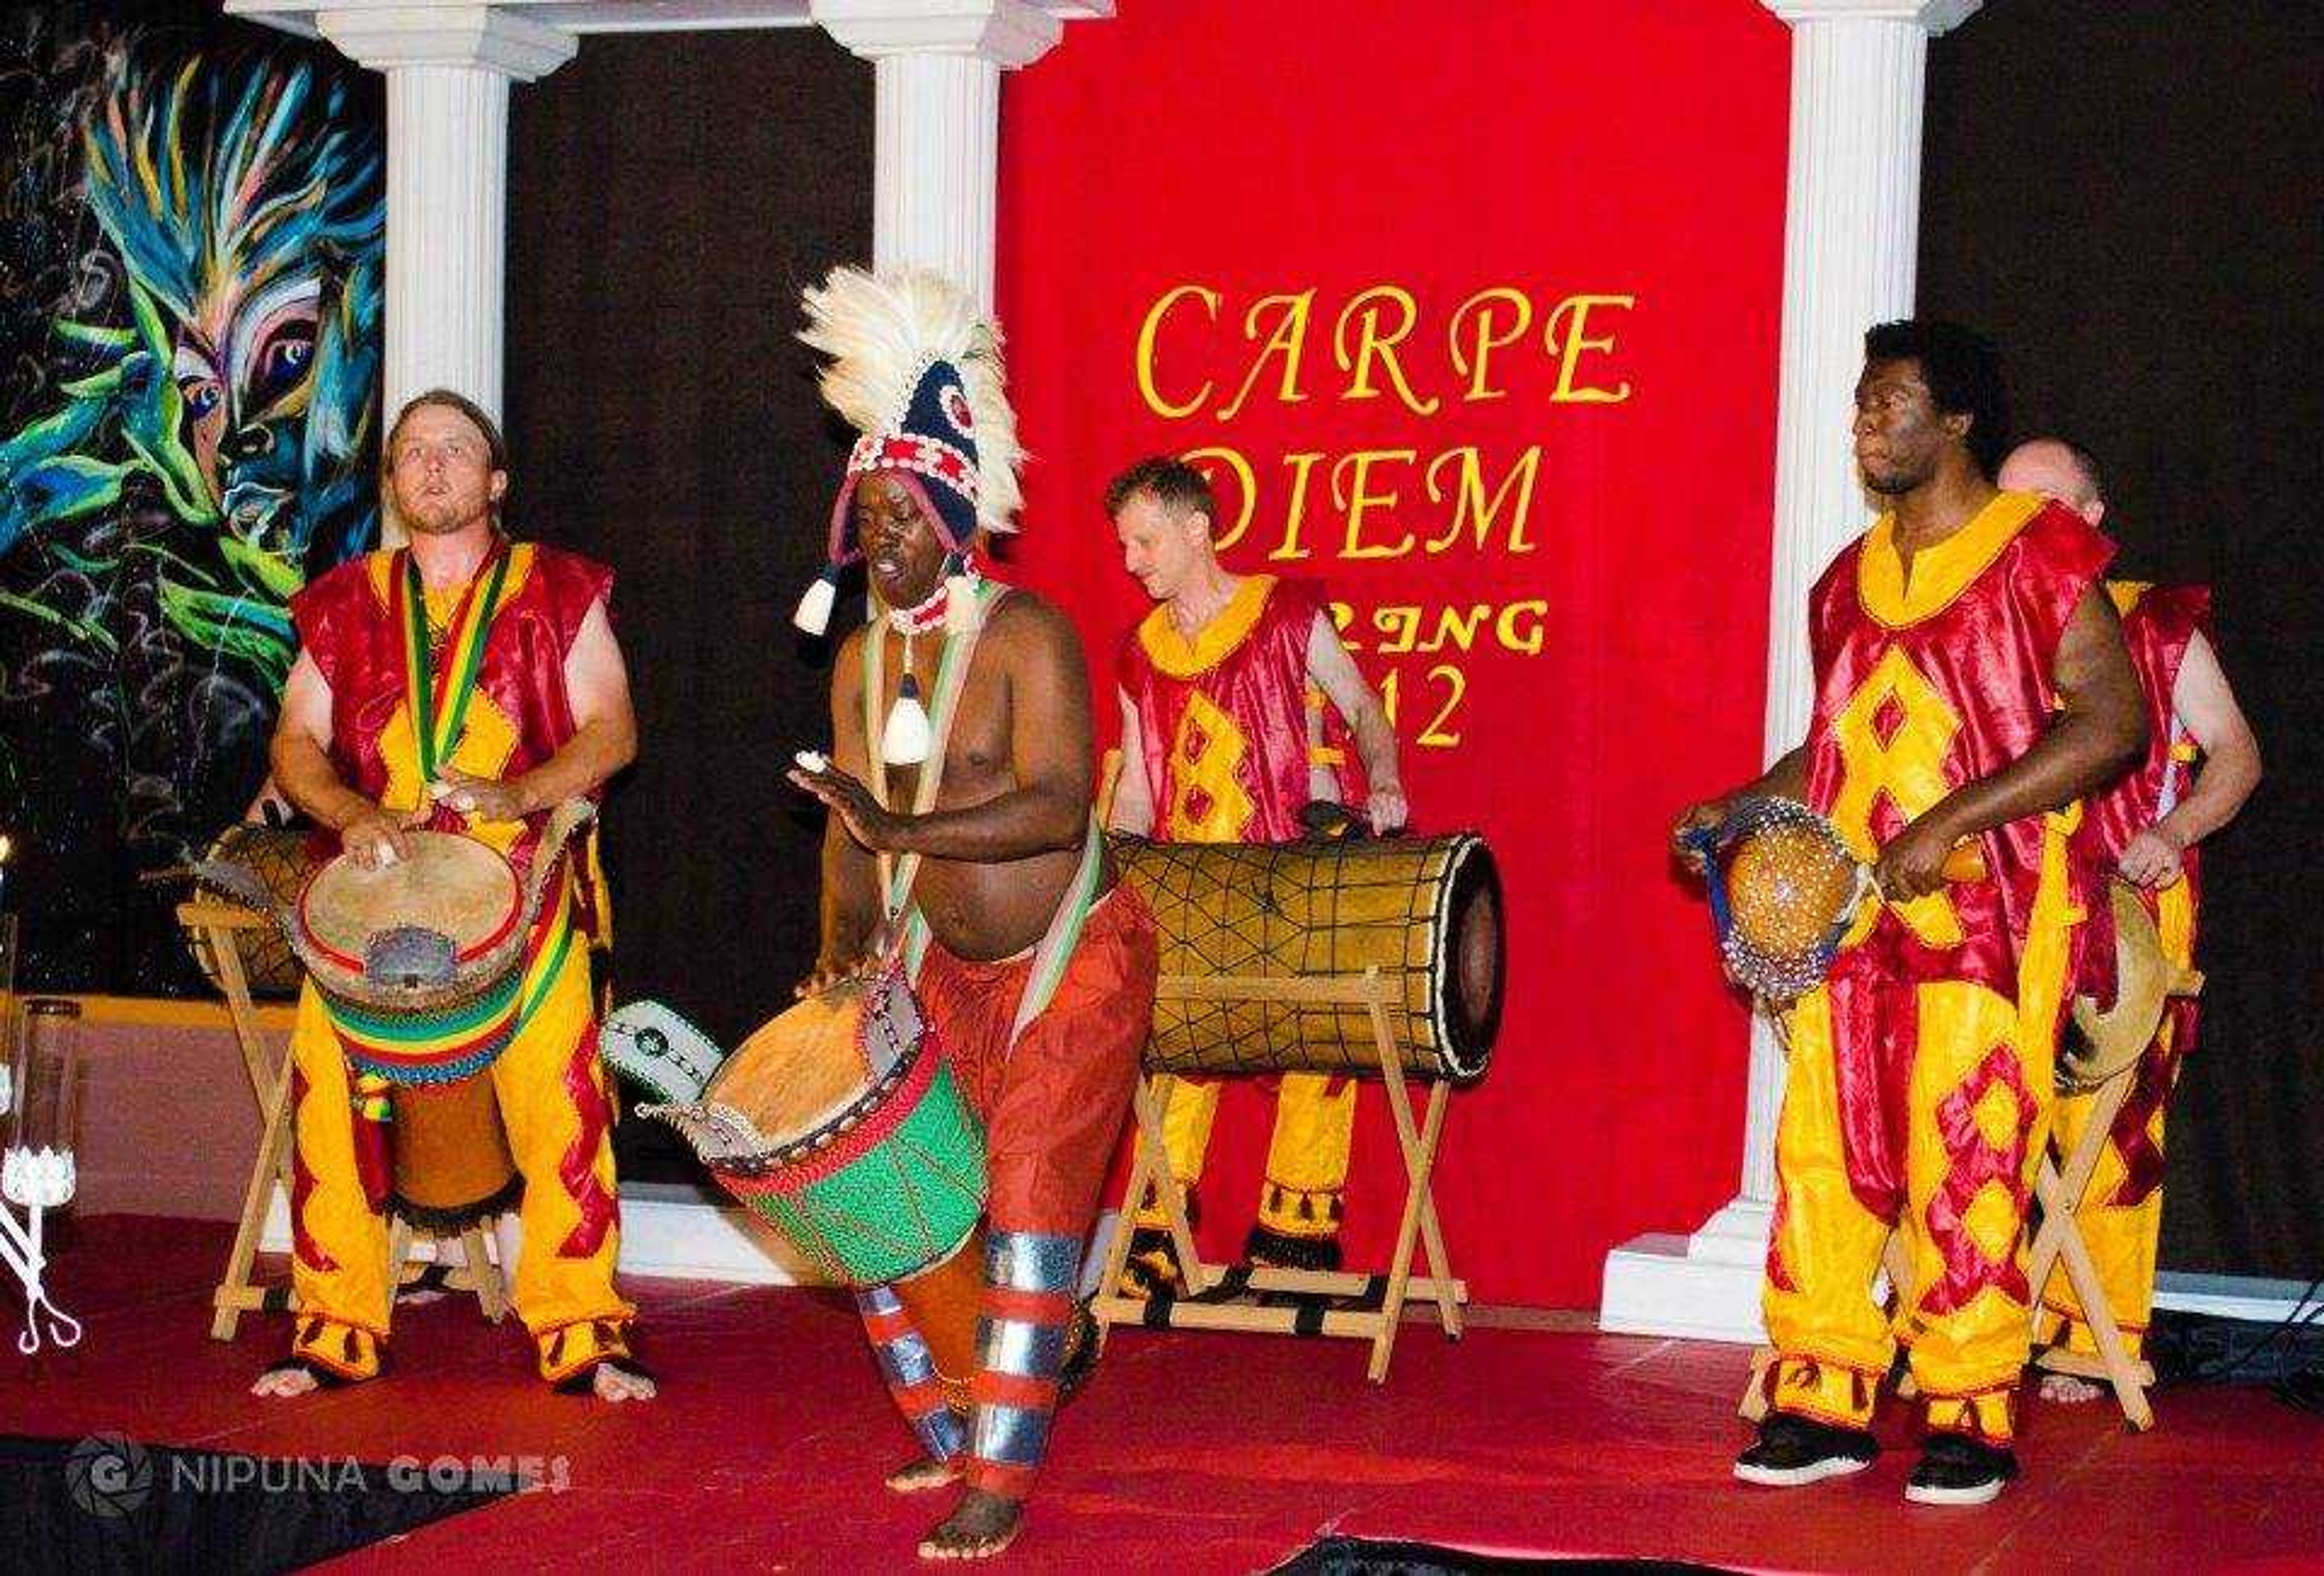 A performance at Carpe Diem in spring 2012 highlights a culture's music. Submitted photo